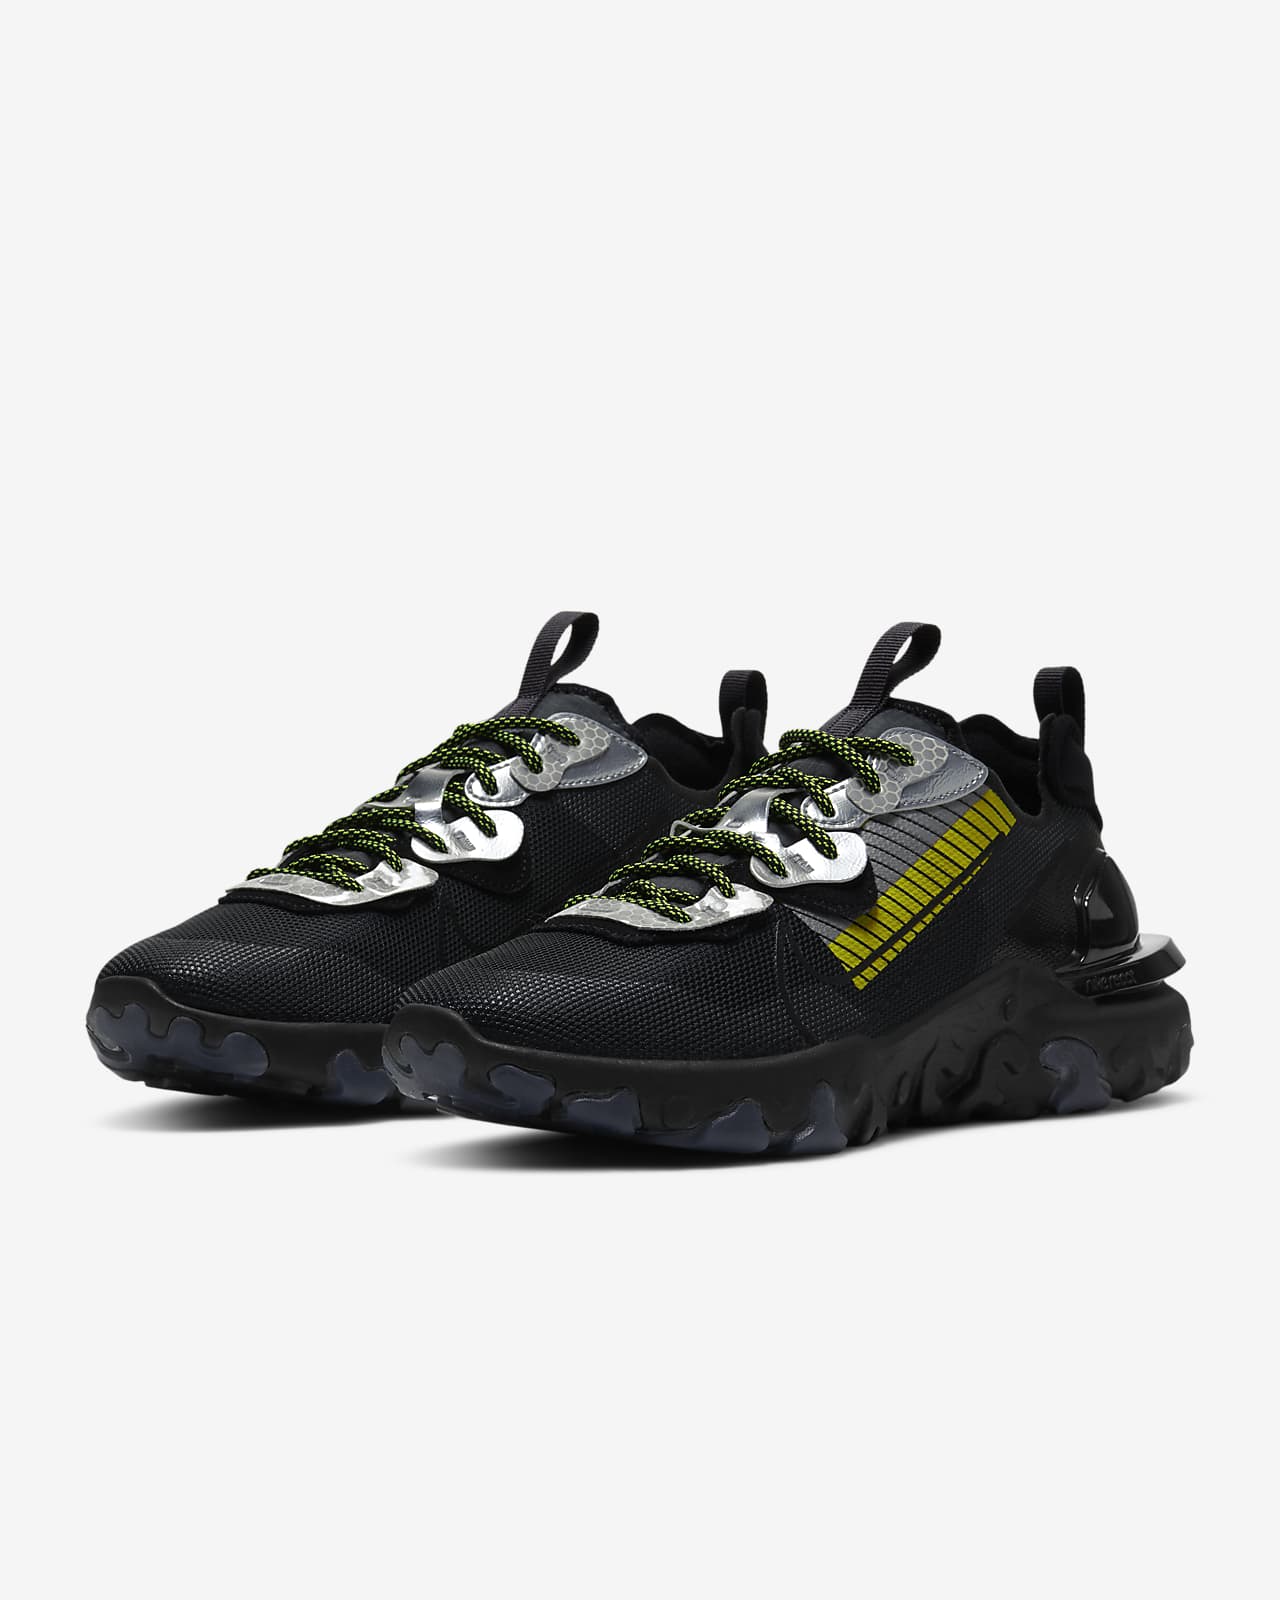 nike homme react vision cheap buy online